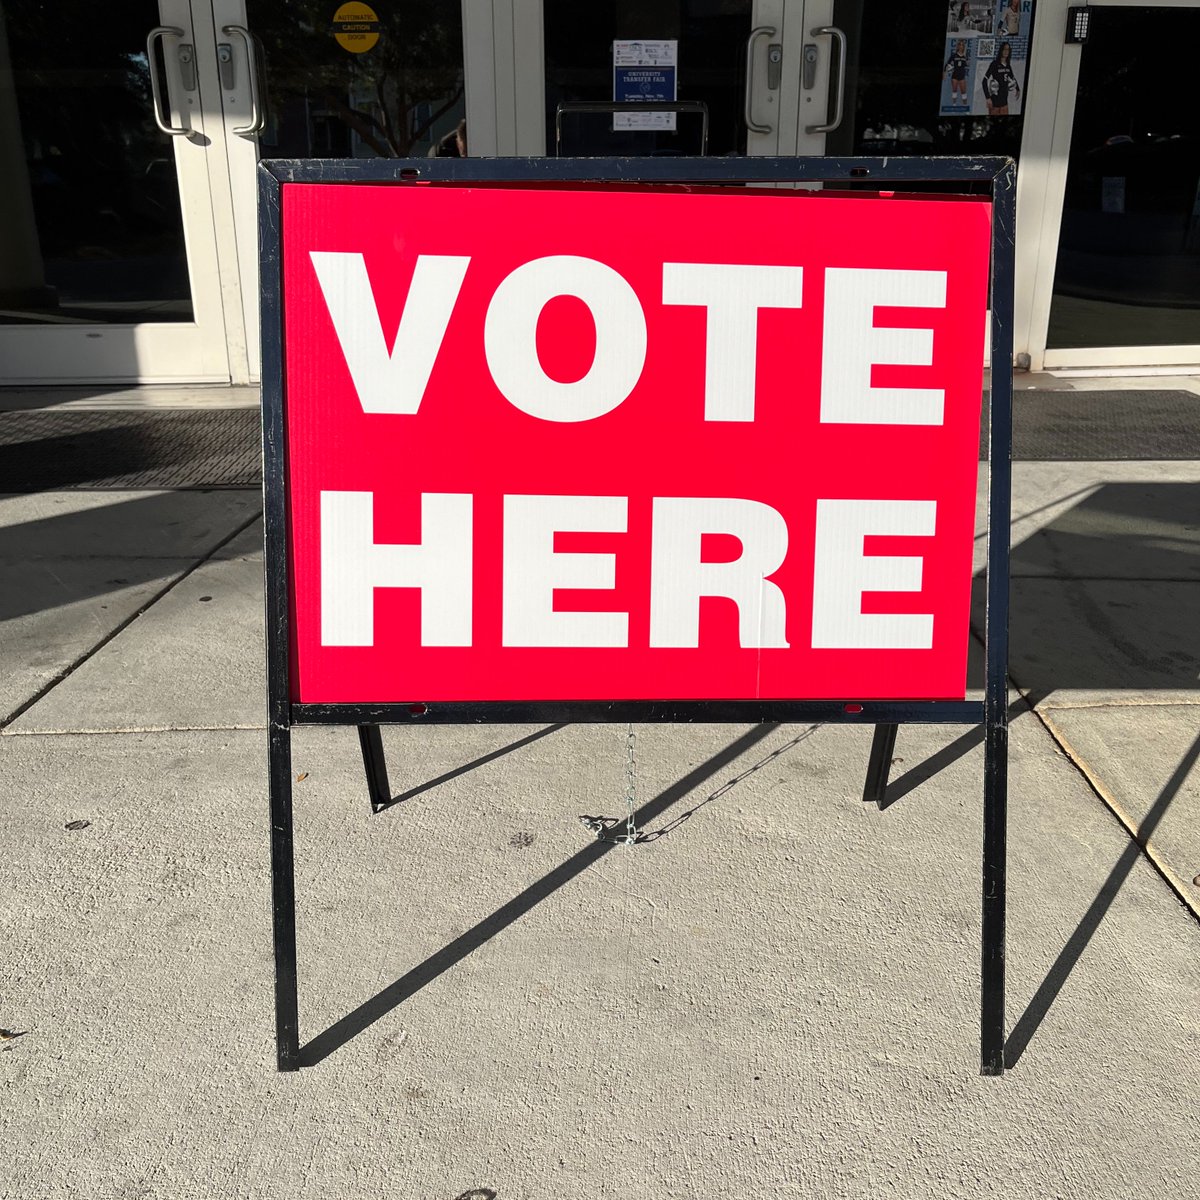 It's Municipal Election Day! SO👏PLEASE👏GO👏 VOTE👏

Some things to remember:
➡️Check your polling place ahead of time
➡️Bring your photo ID
➡️Polls close at 7:30pm, but anyone in line at 7:30 will be allowed to vote

More details can be found at nhcvote.com